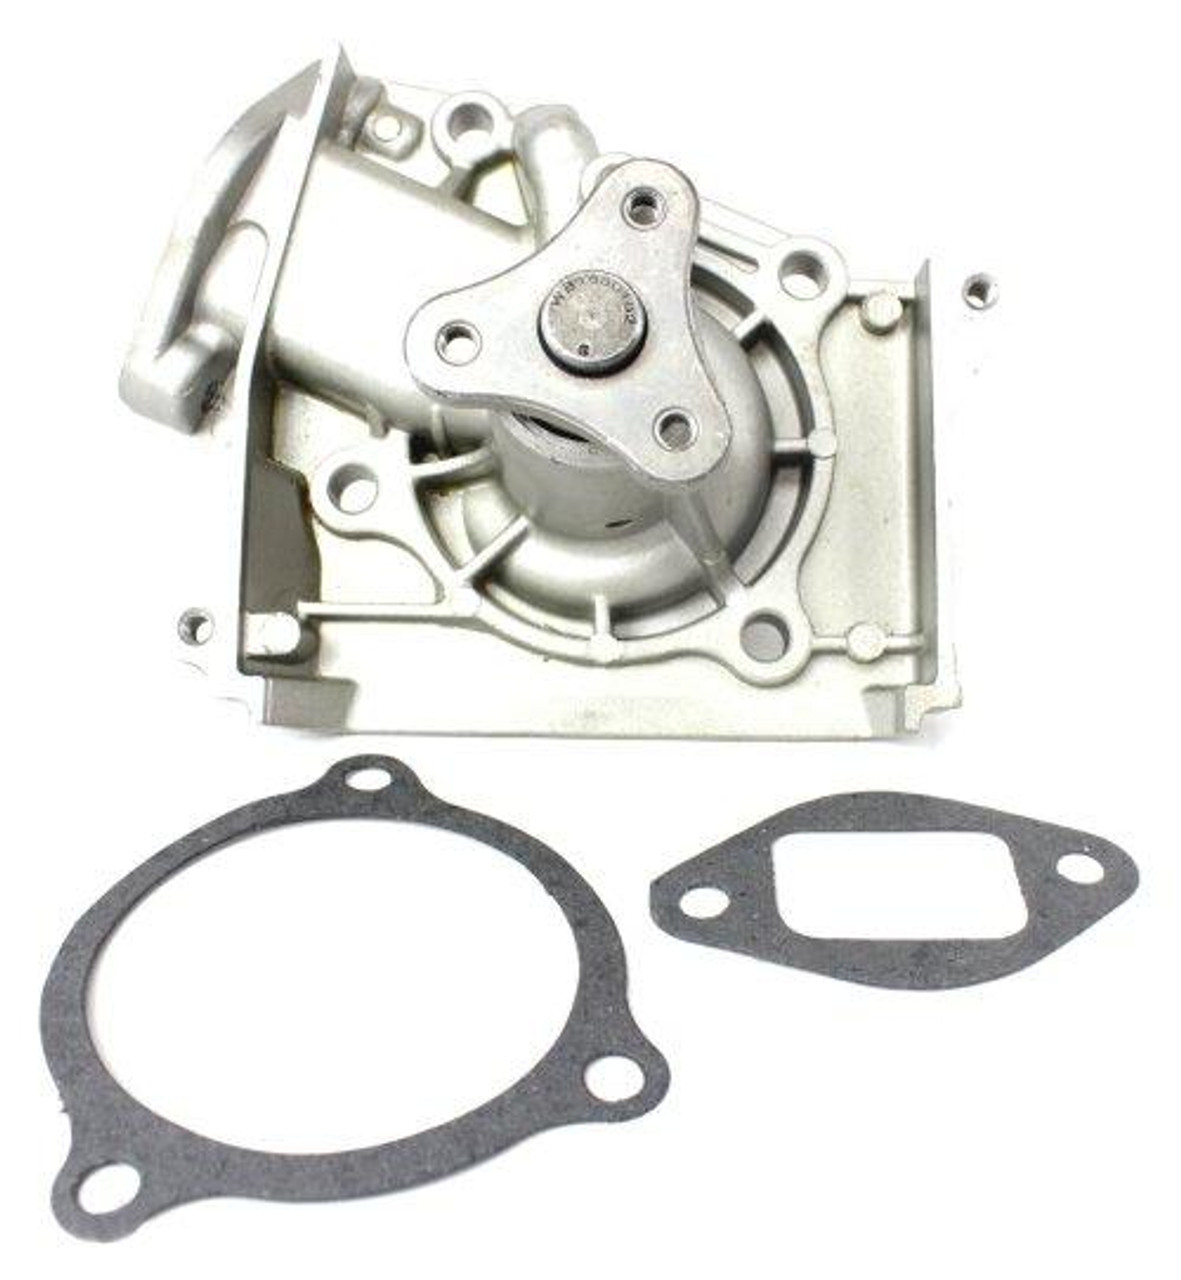 Water Pump - 1995 Ford Aspire 1.3L Engine Parts # WP451ZE2